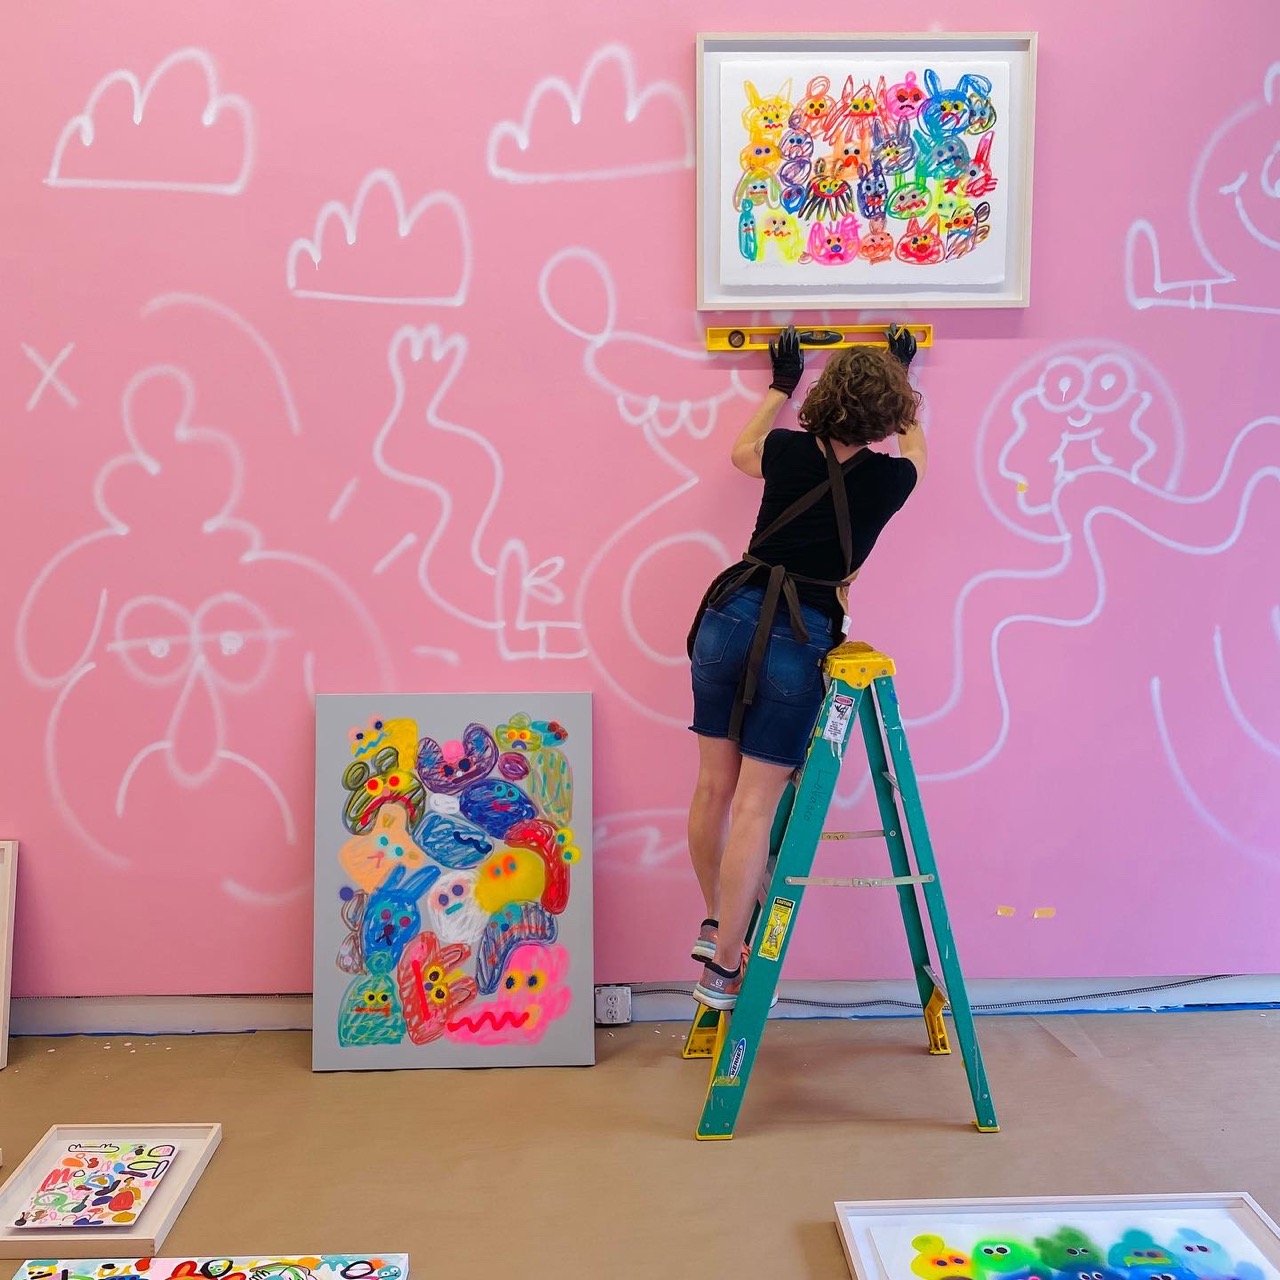 A woman on a ladder painting on a pink wall.